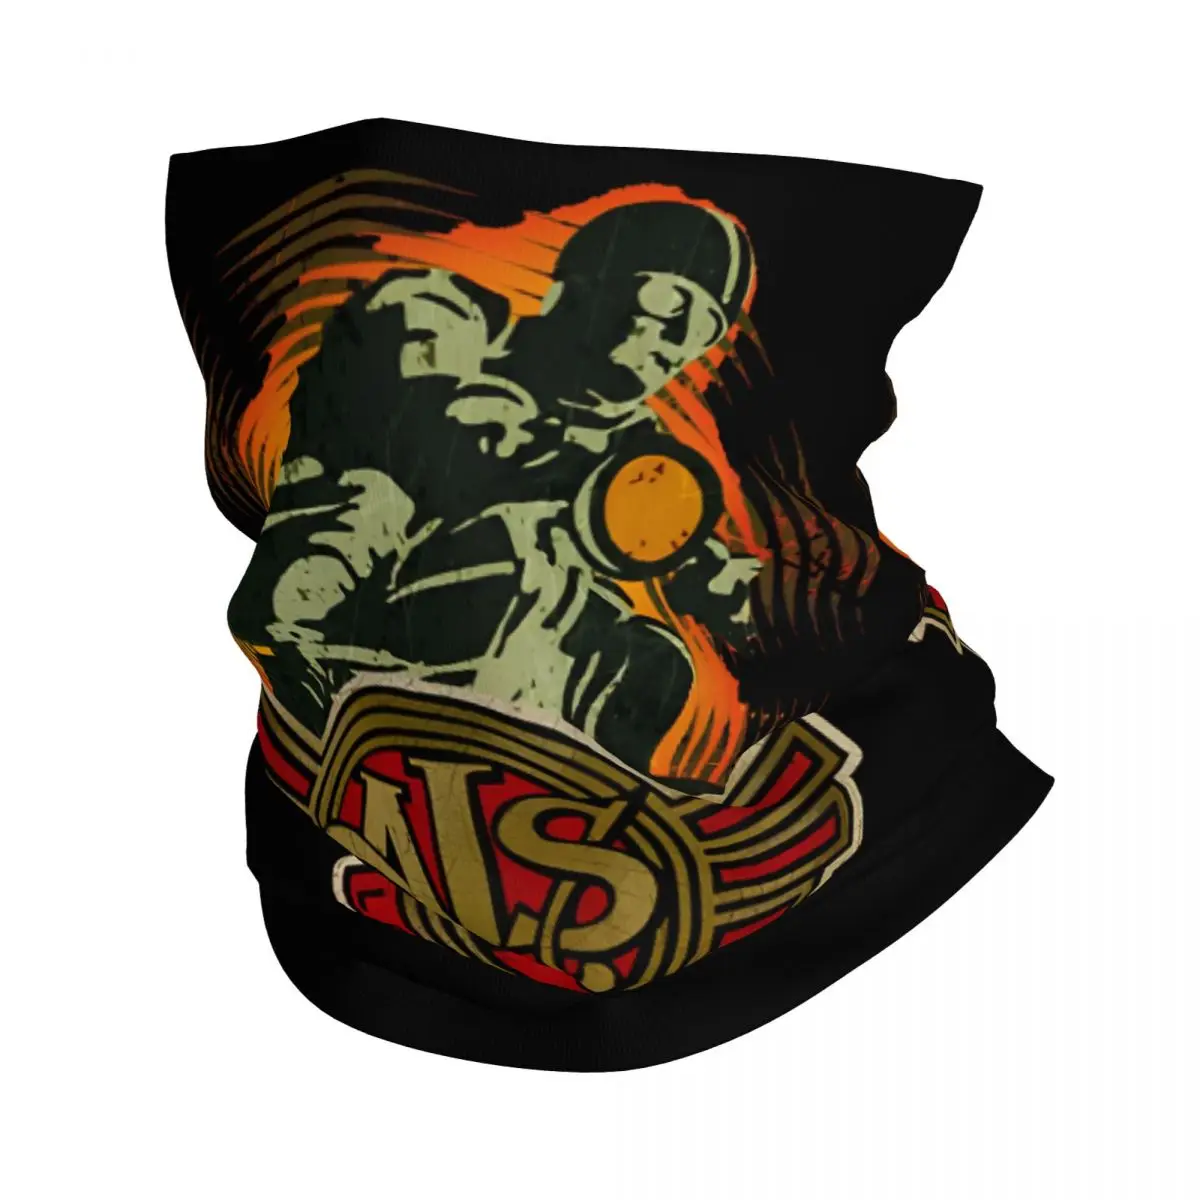 

Motorcycles London Bandana Neck Gaiter Printed Motorcycle Club AJS Wrap Scarf Multi-use Cycling Riding Unisex Adult Winter